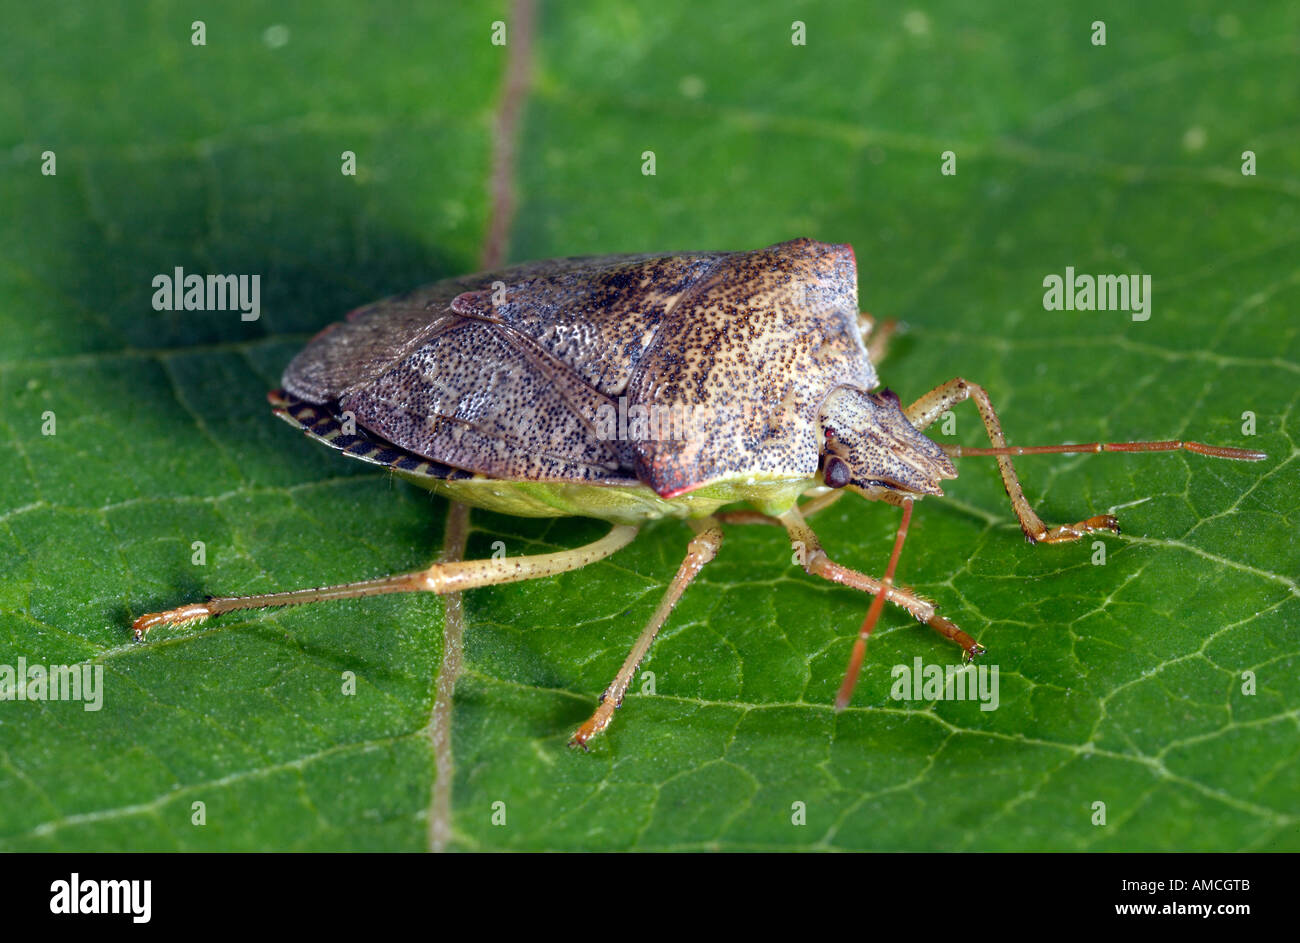 Spined Soldier Bug Podisus maculiventris Foto Stock